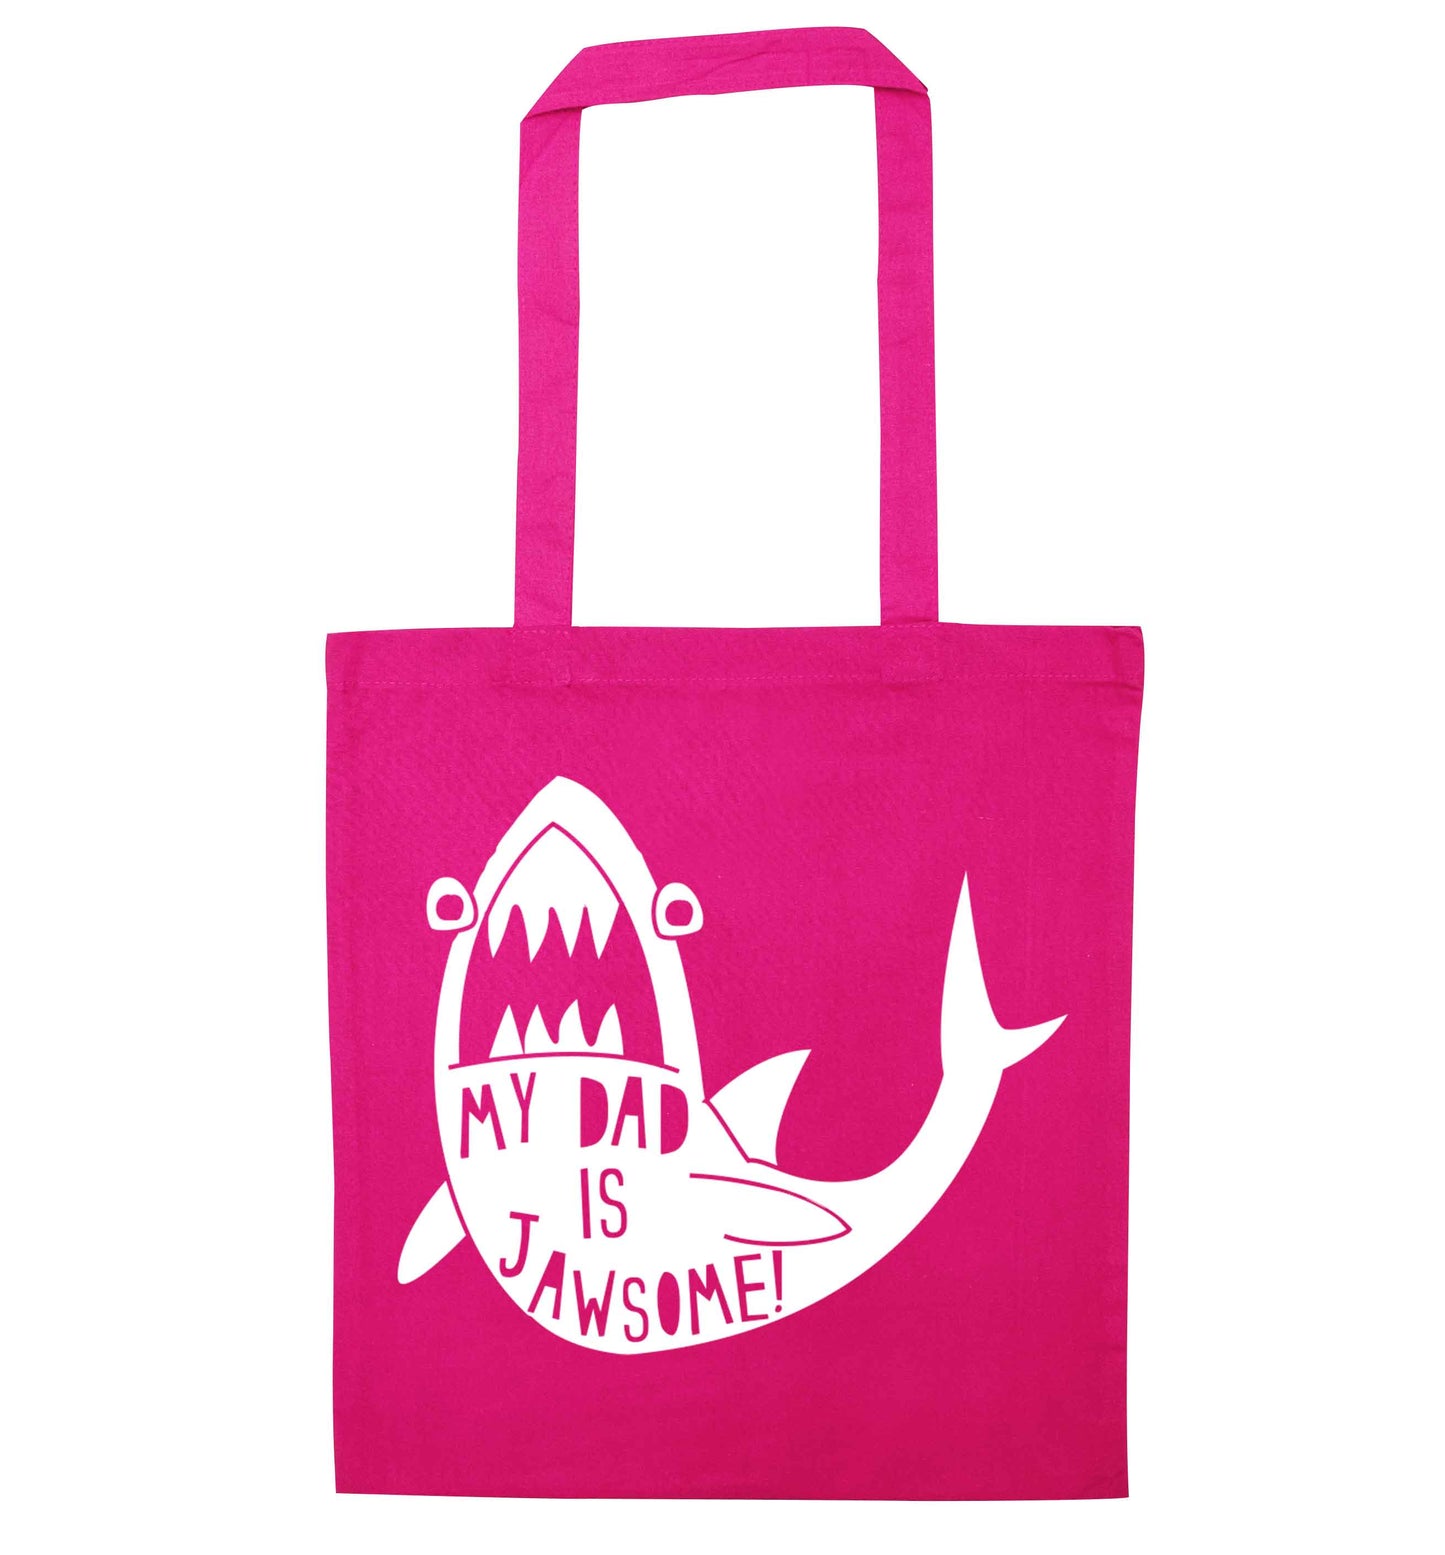 My Dad is jawsome pink tote bag